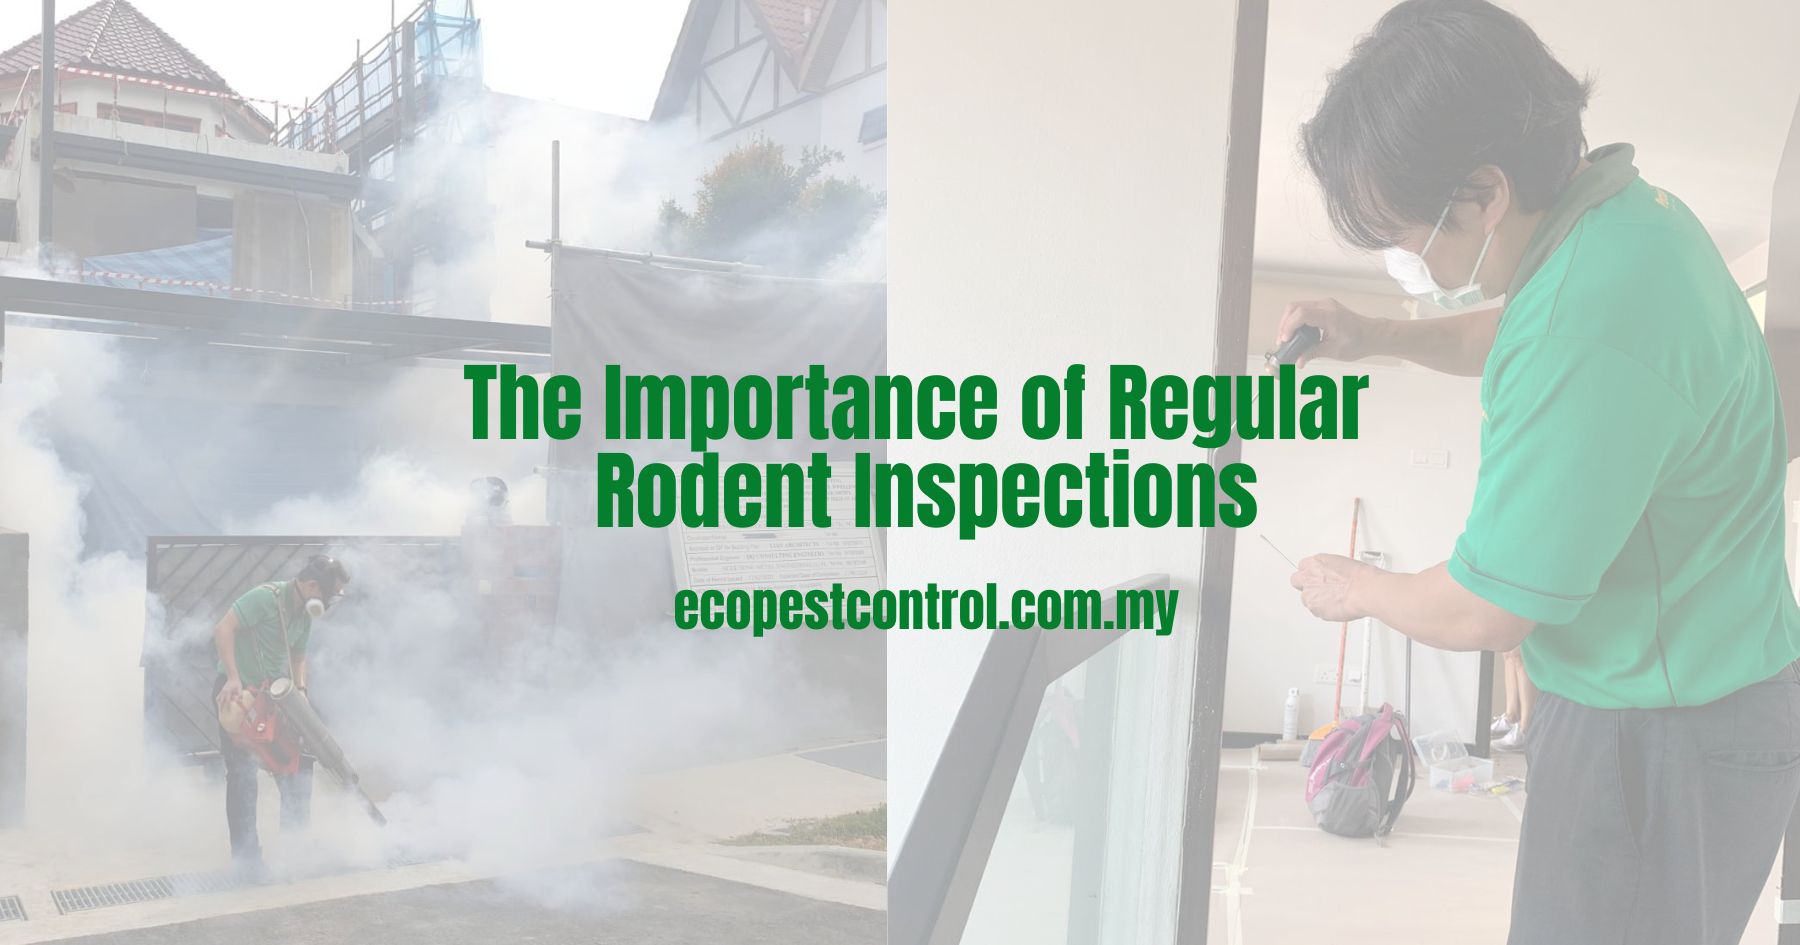 The Importance of Regular Rodent Inspections